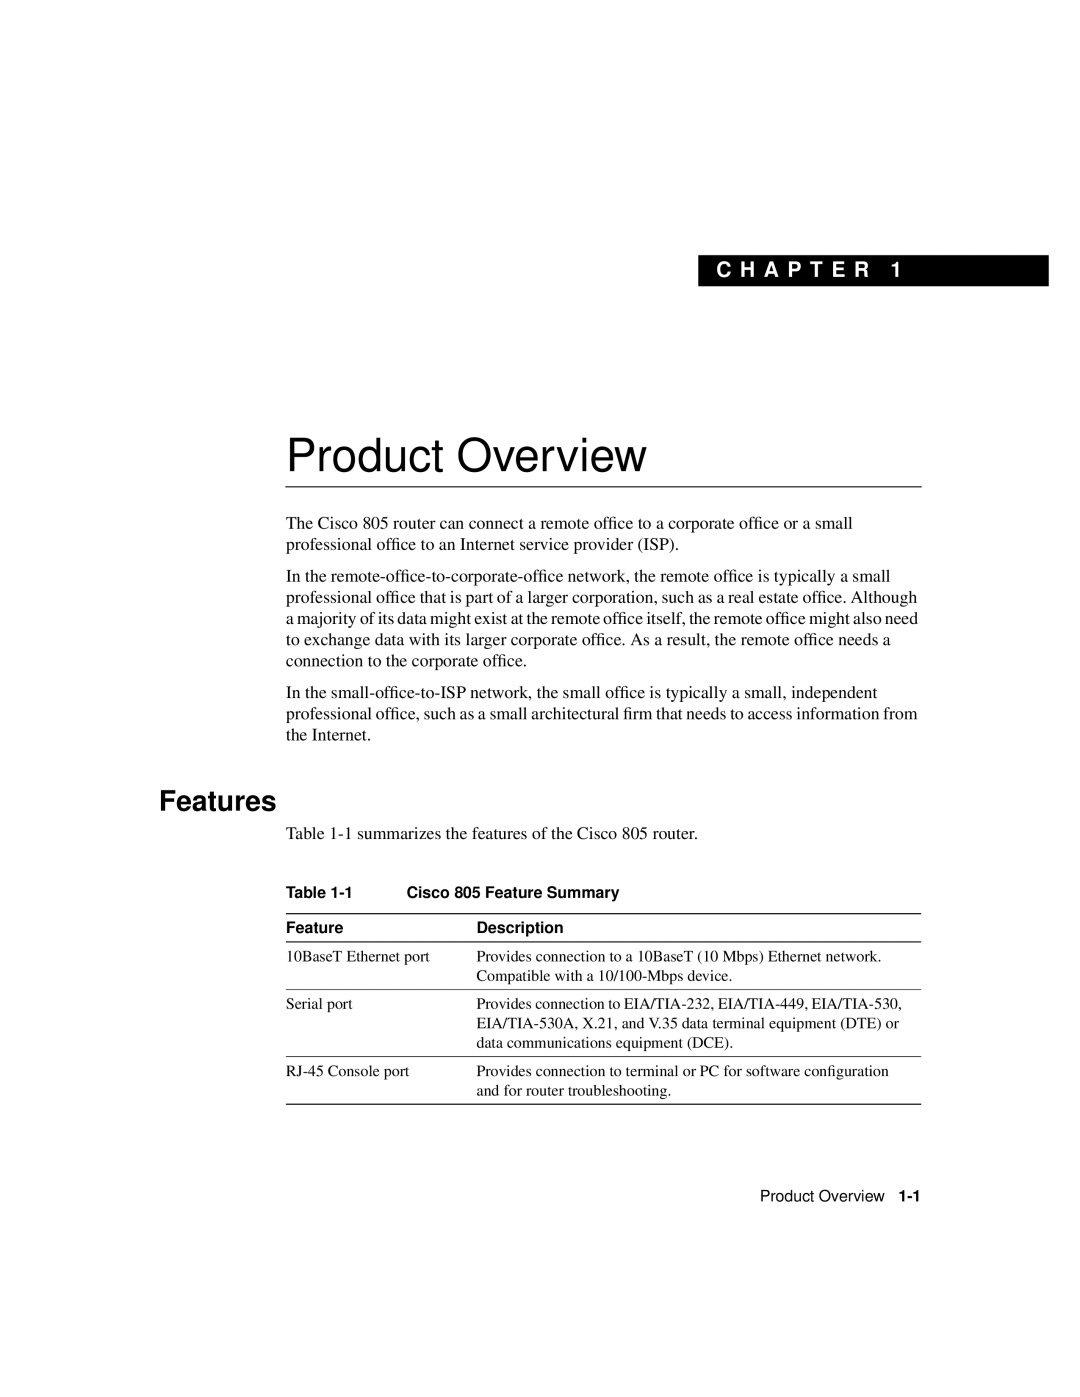 Cisco Systems CISCO805 manual Features, Product Overview, C H A P T E R 